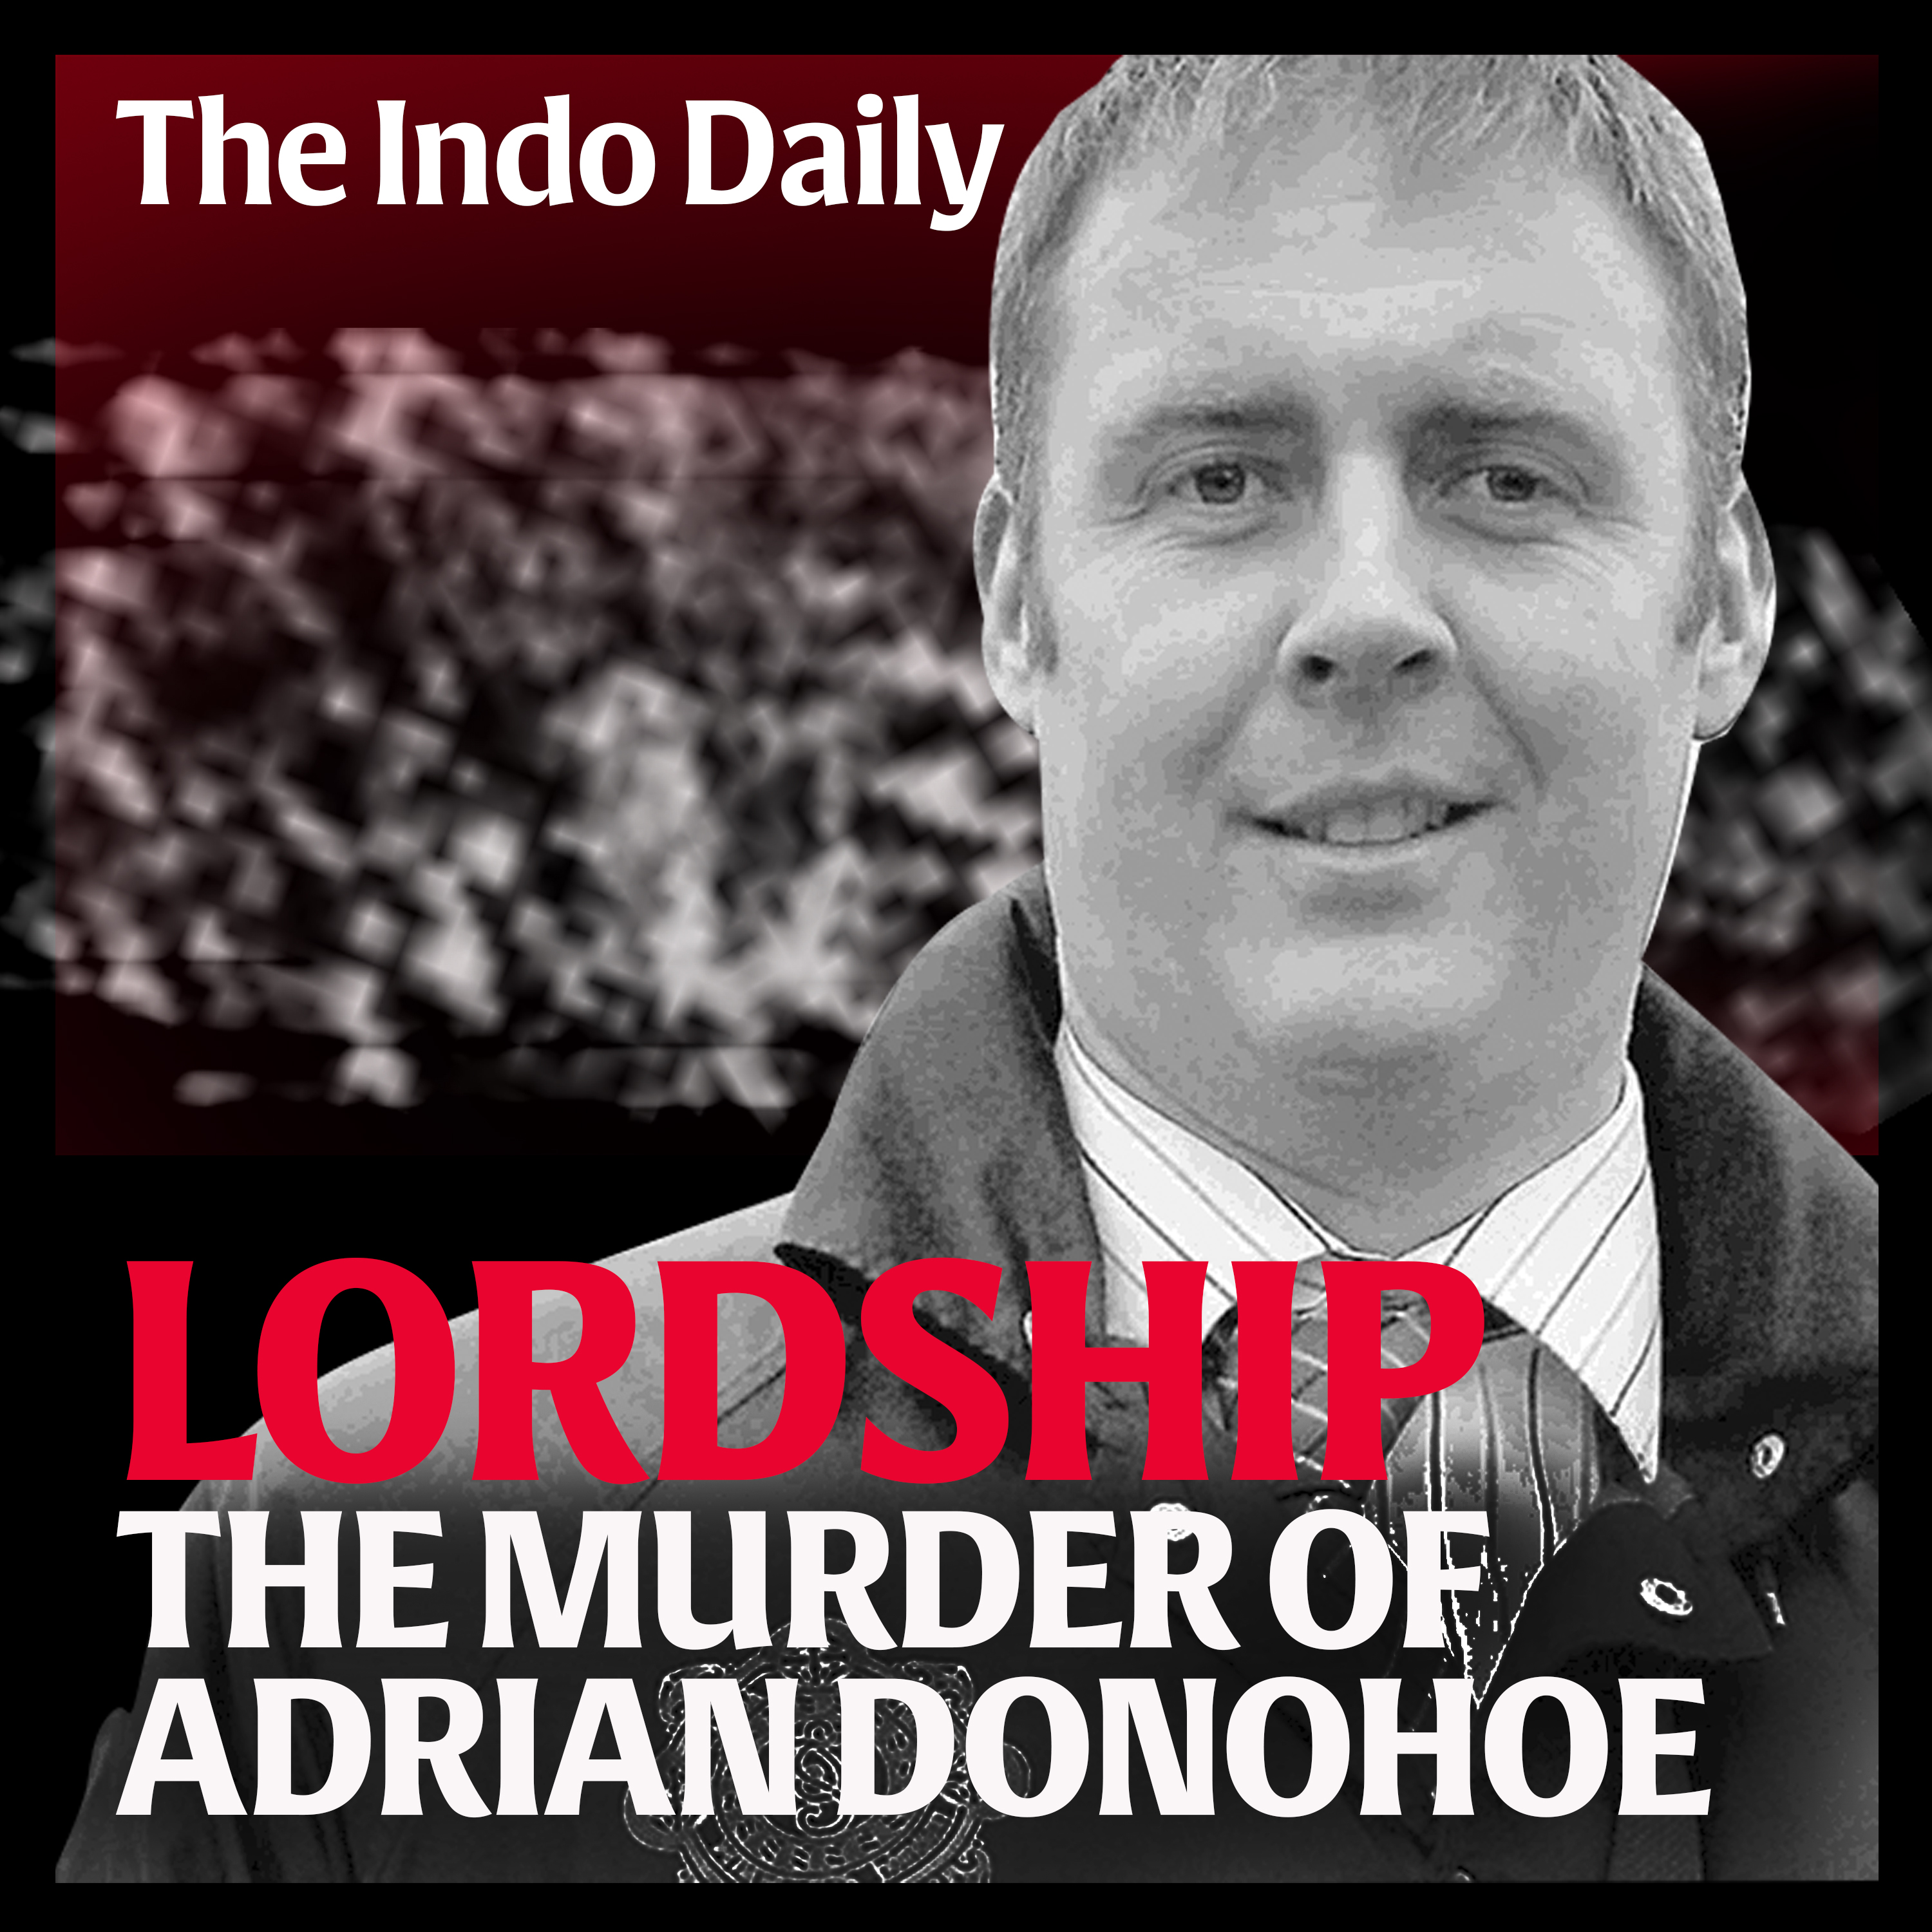 Lordship: The murder of Adrian Donohoe – Part Two